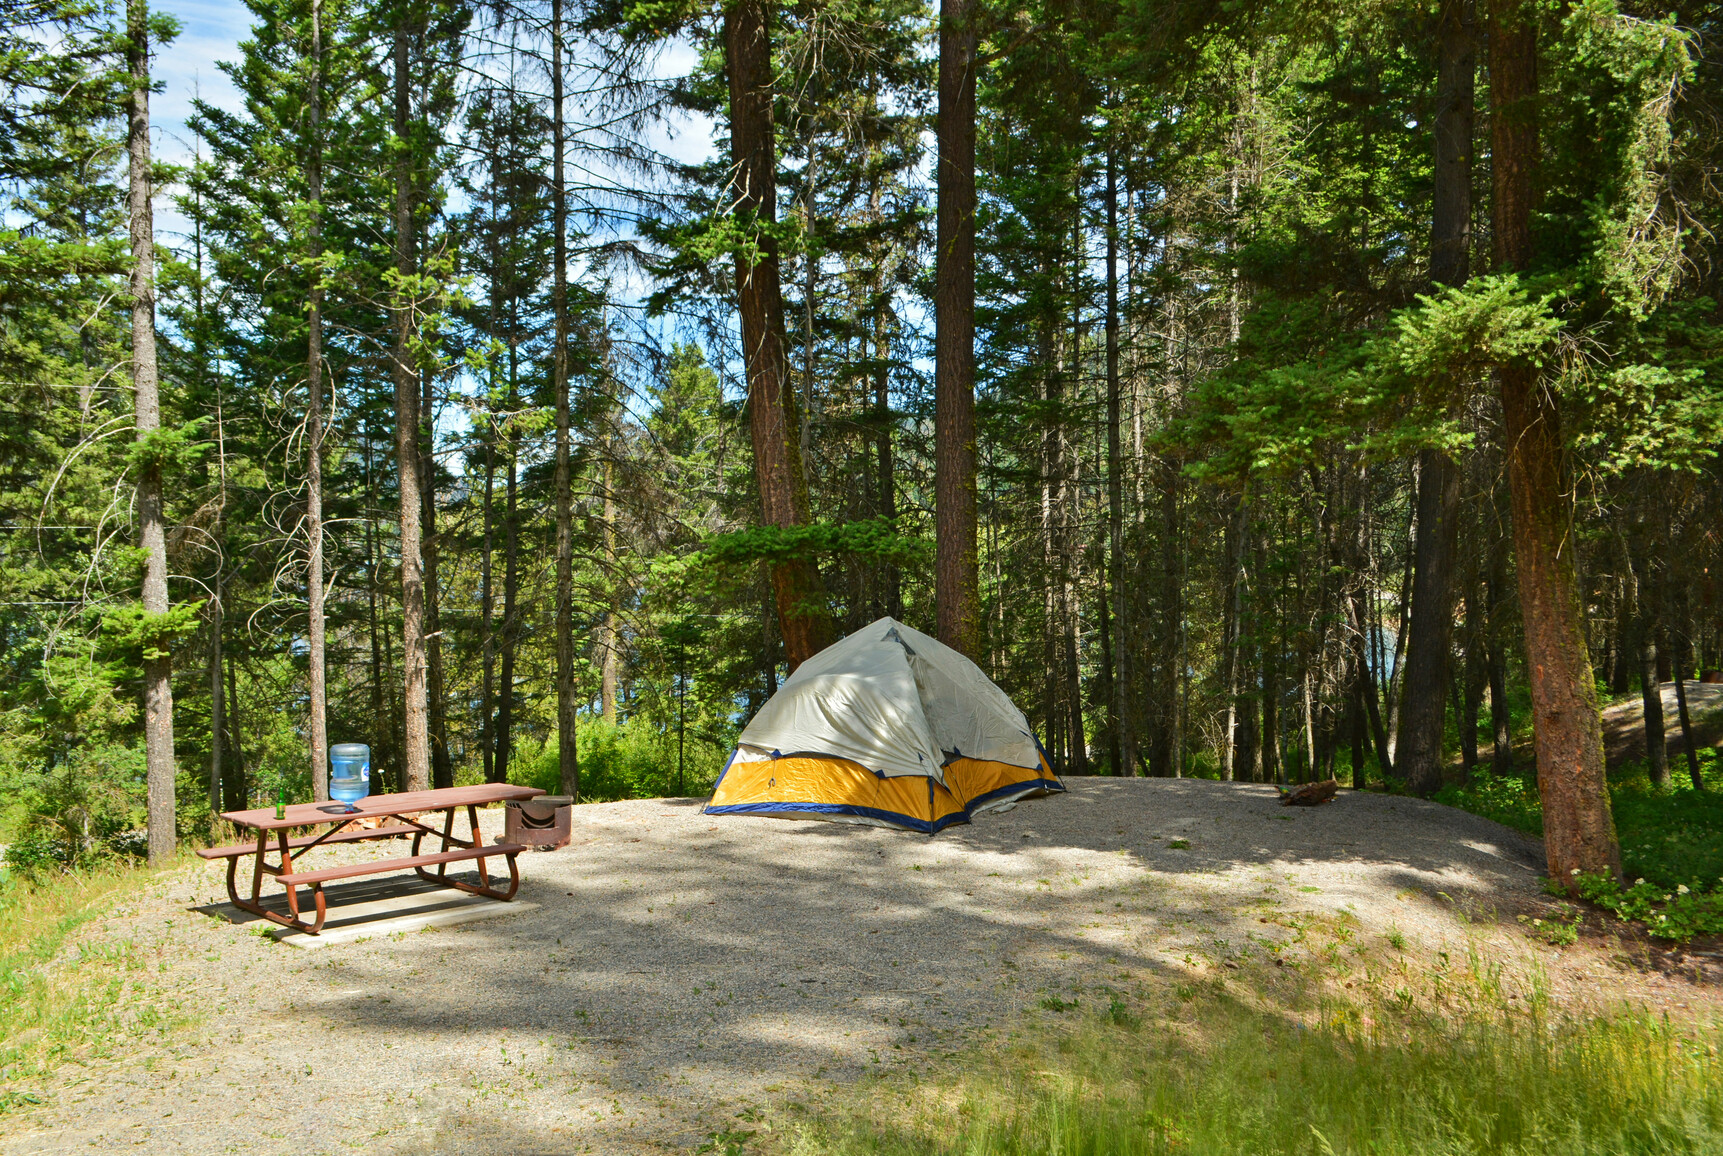 A campsite with a tent, picnic table and fire ring surrounded by trees and forest.